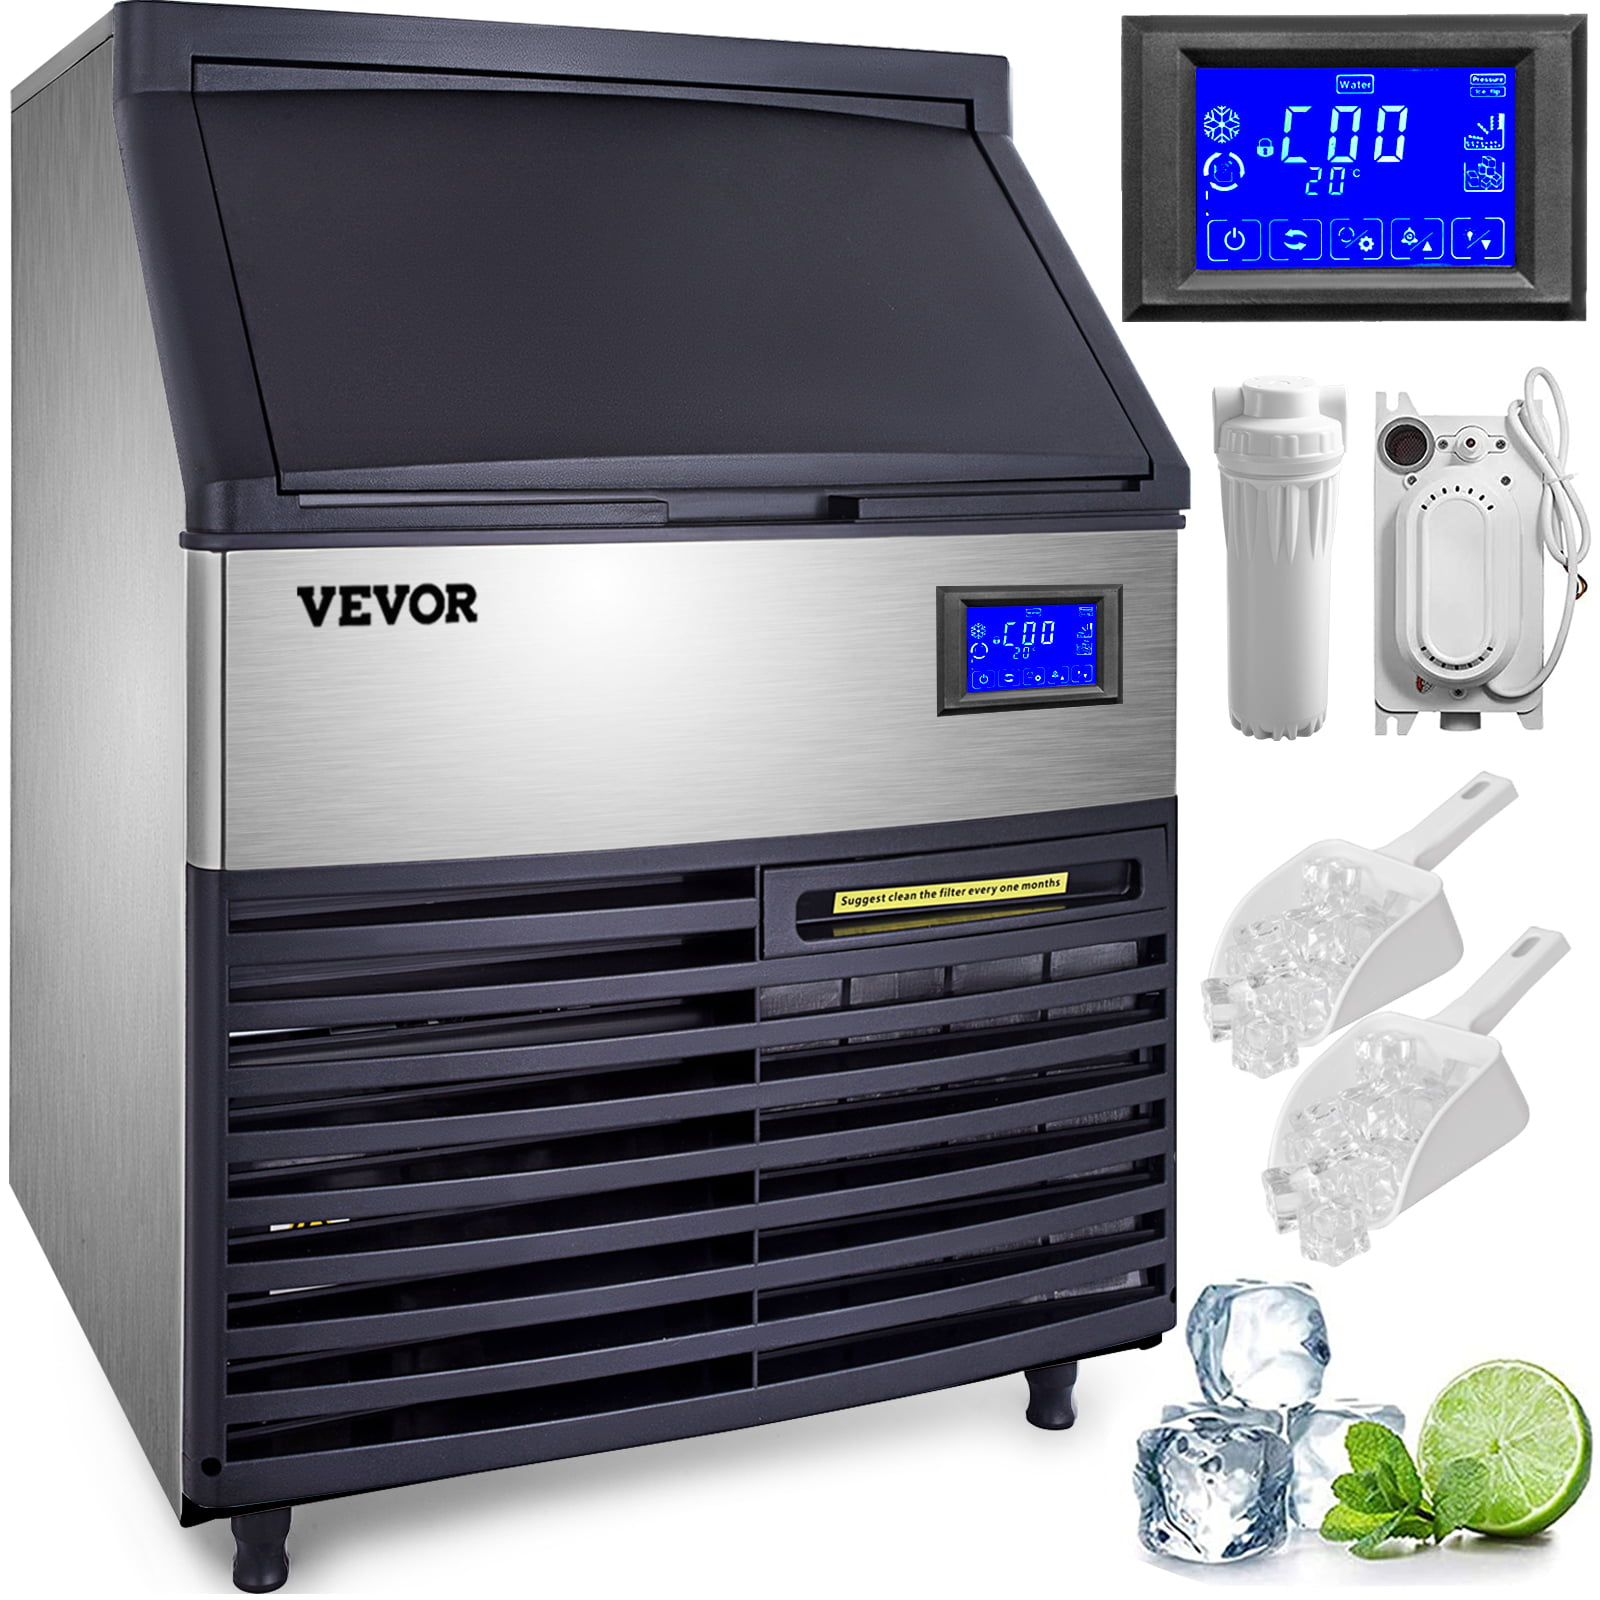 Commercial & Industrial Ice Maker Machines - Professional ... in Dayton Ohio